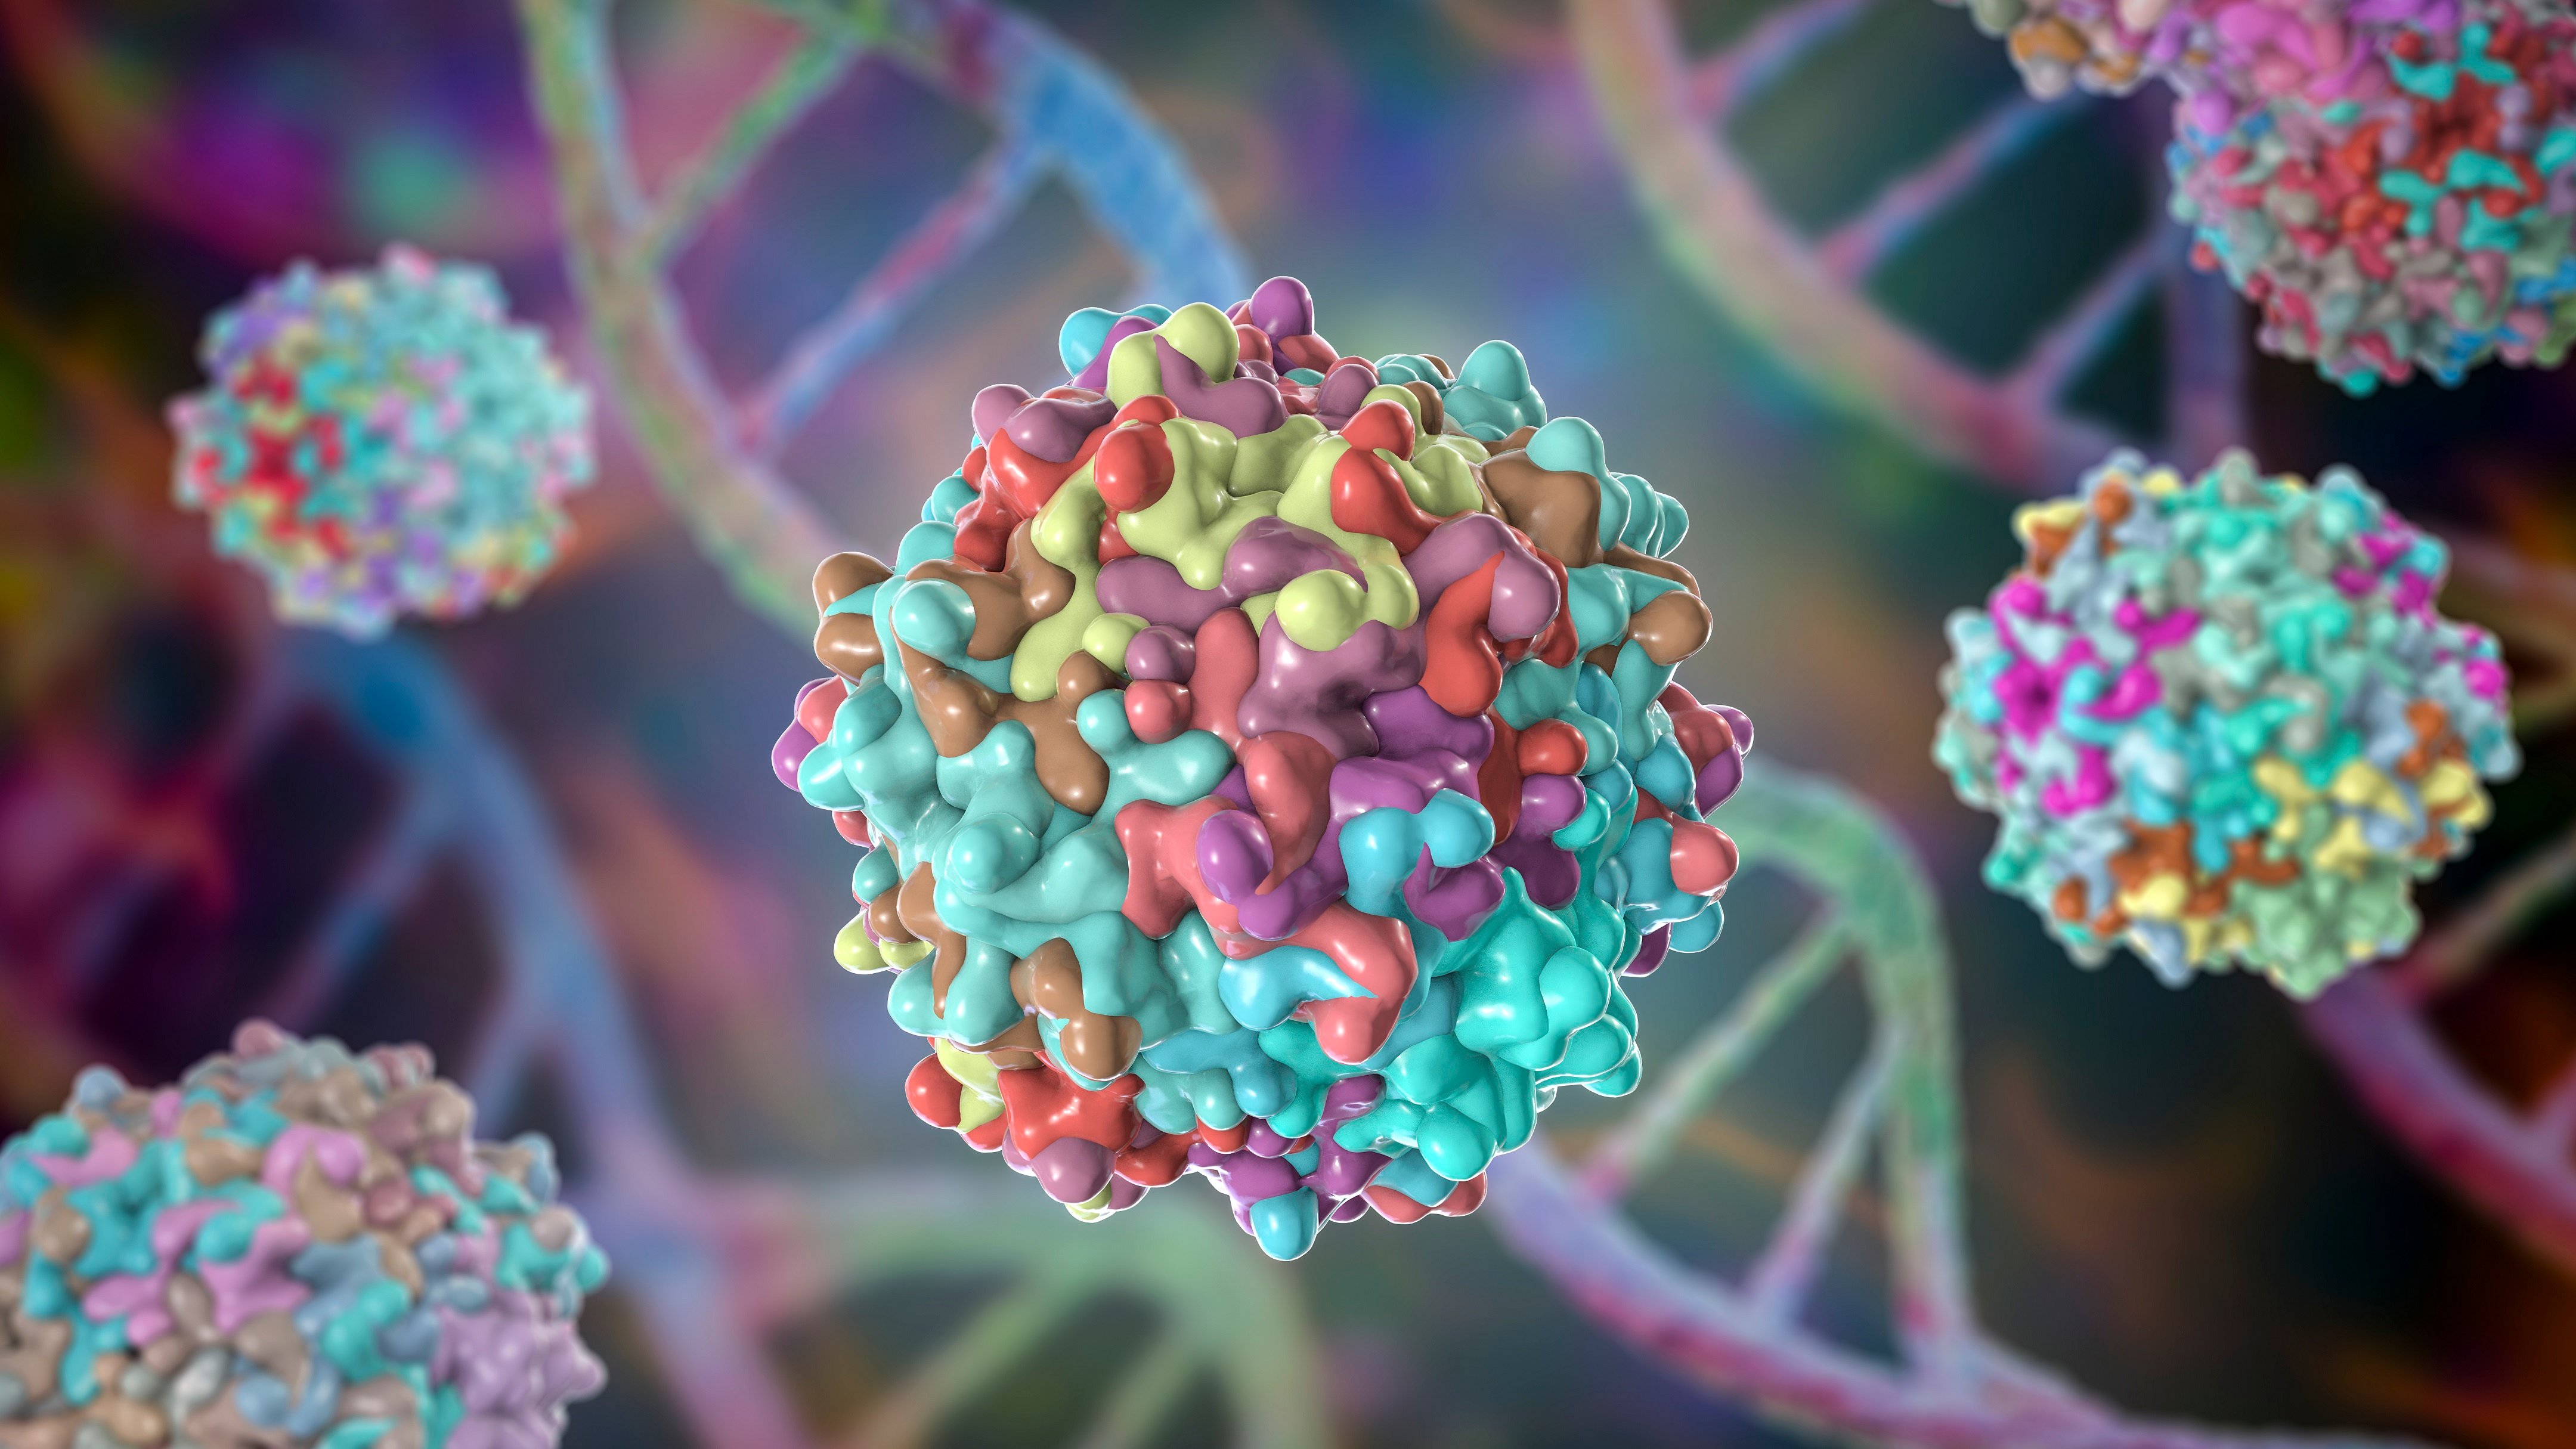 Forge Biologics joins California-backed program to support production of AAV gene therapies